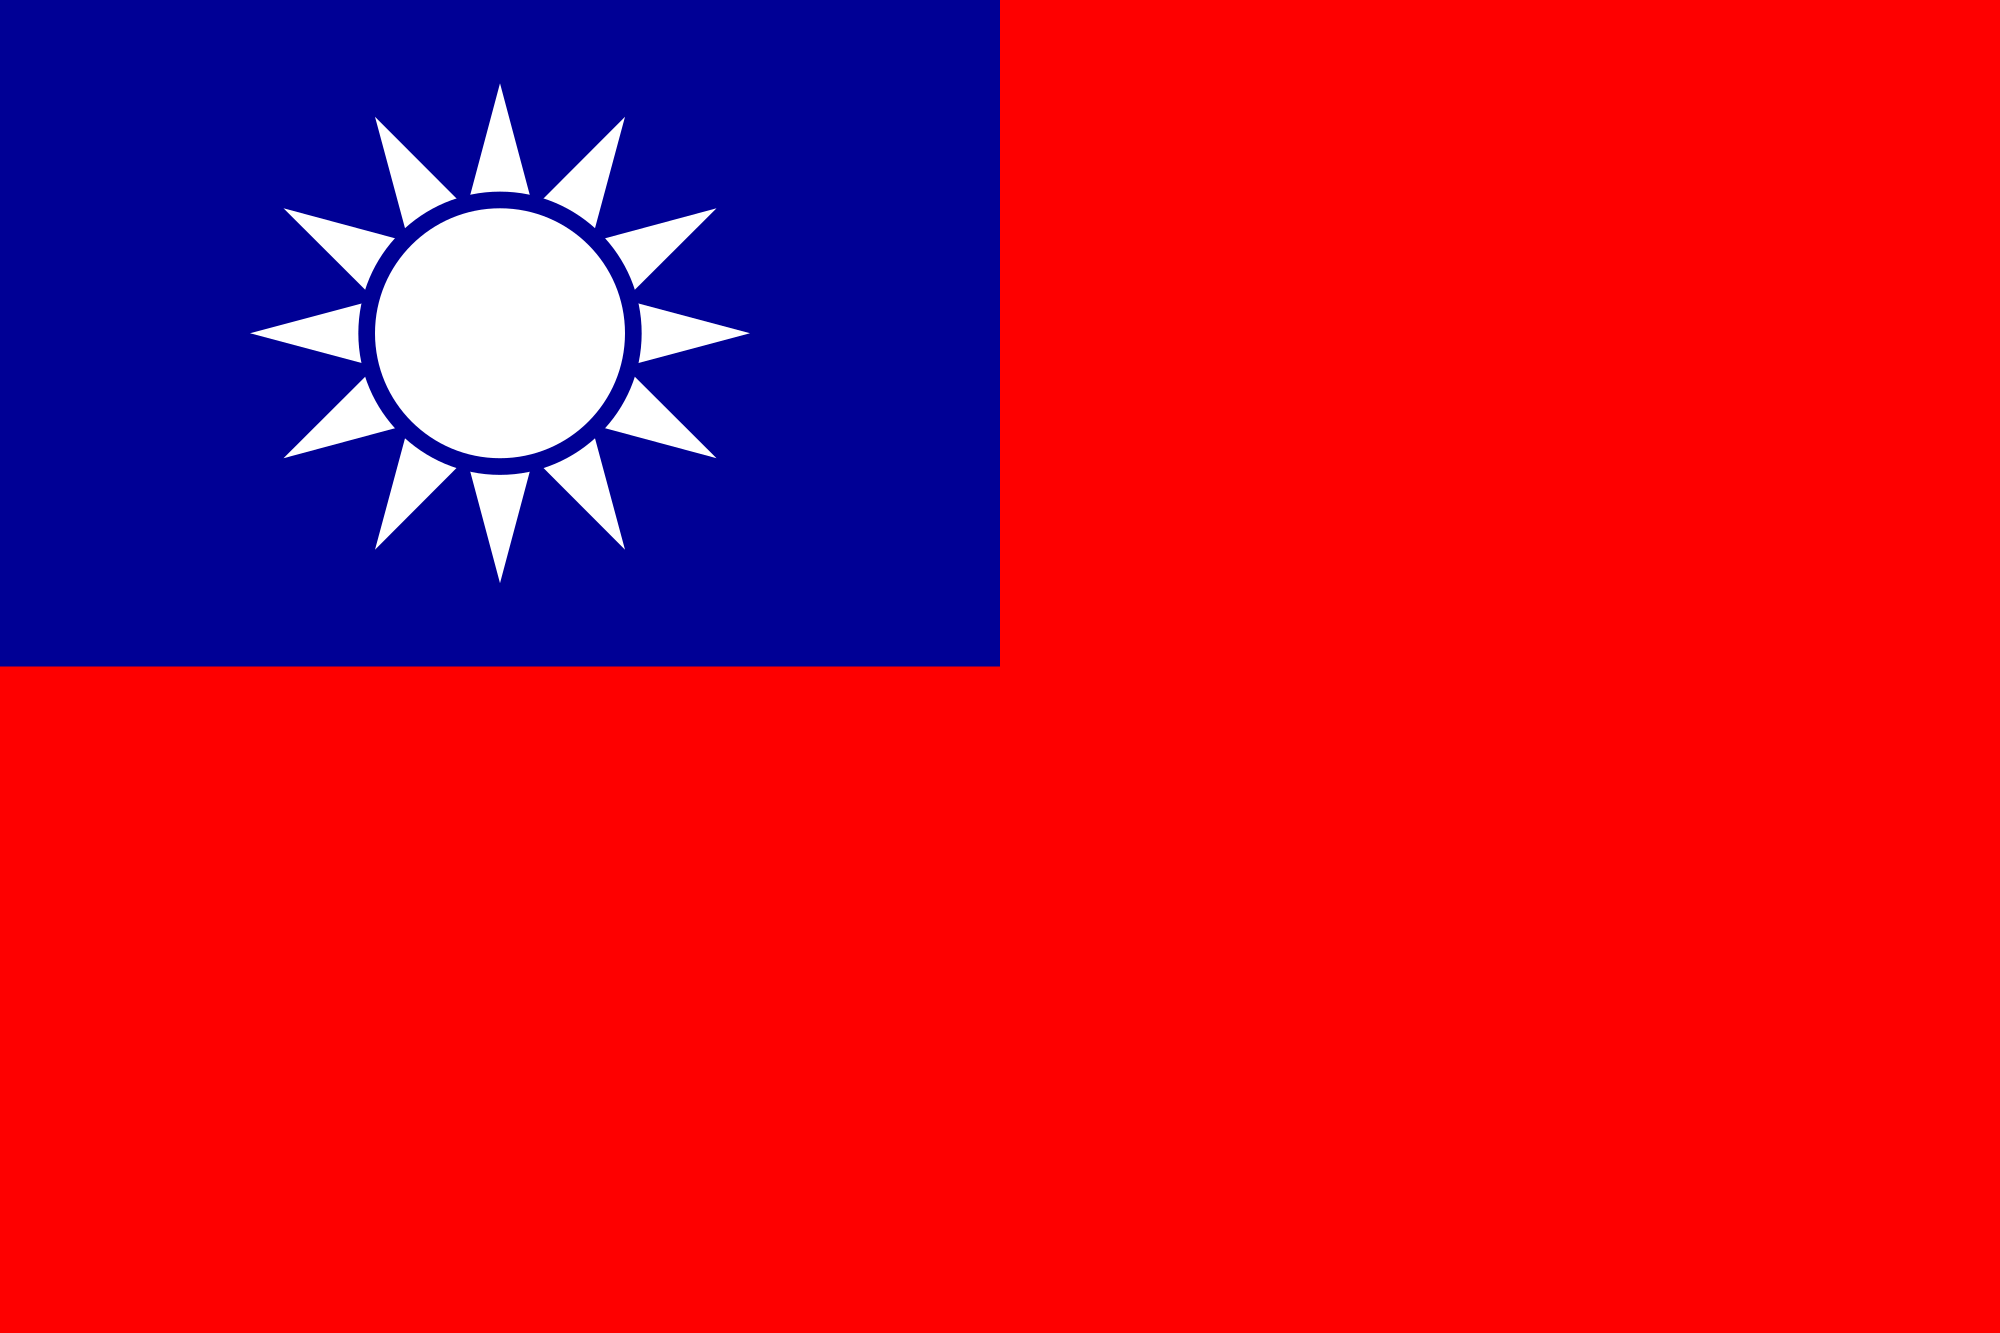 White People with Blue Square Logo - Flag of the Republic of China